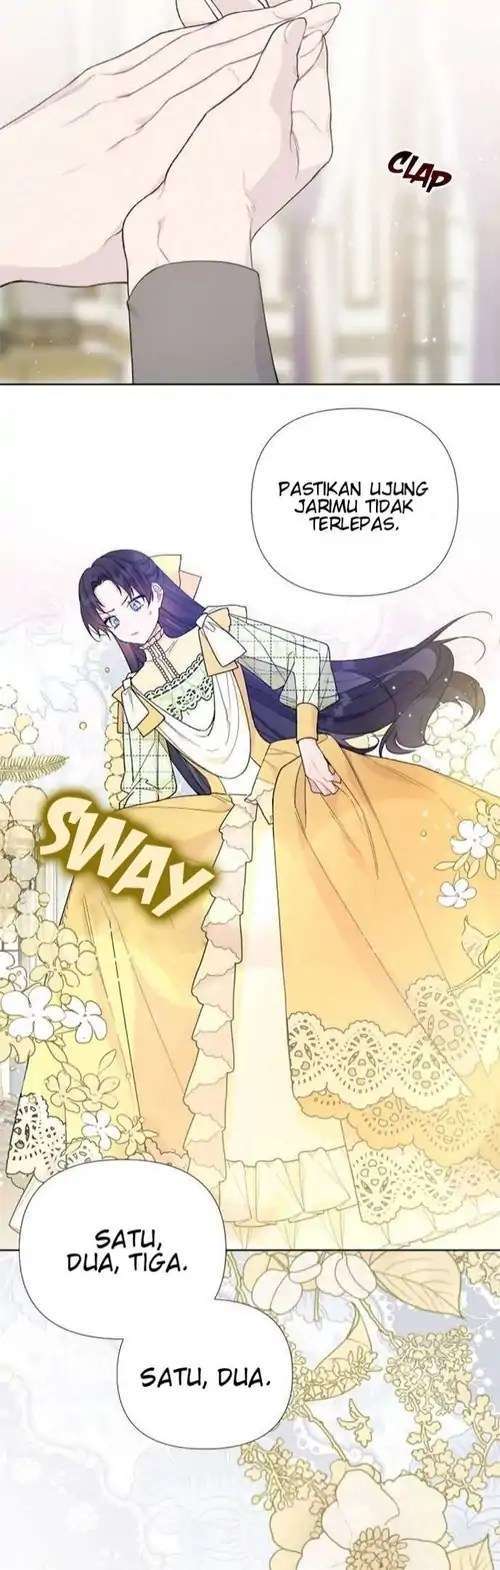 The Way That Knight Lives as a Lady Chapter 12